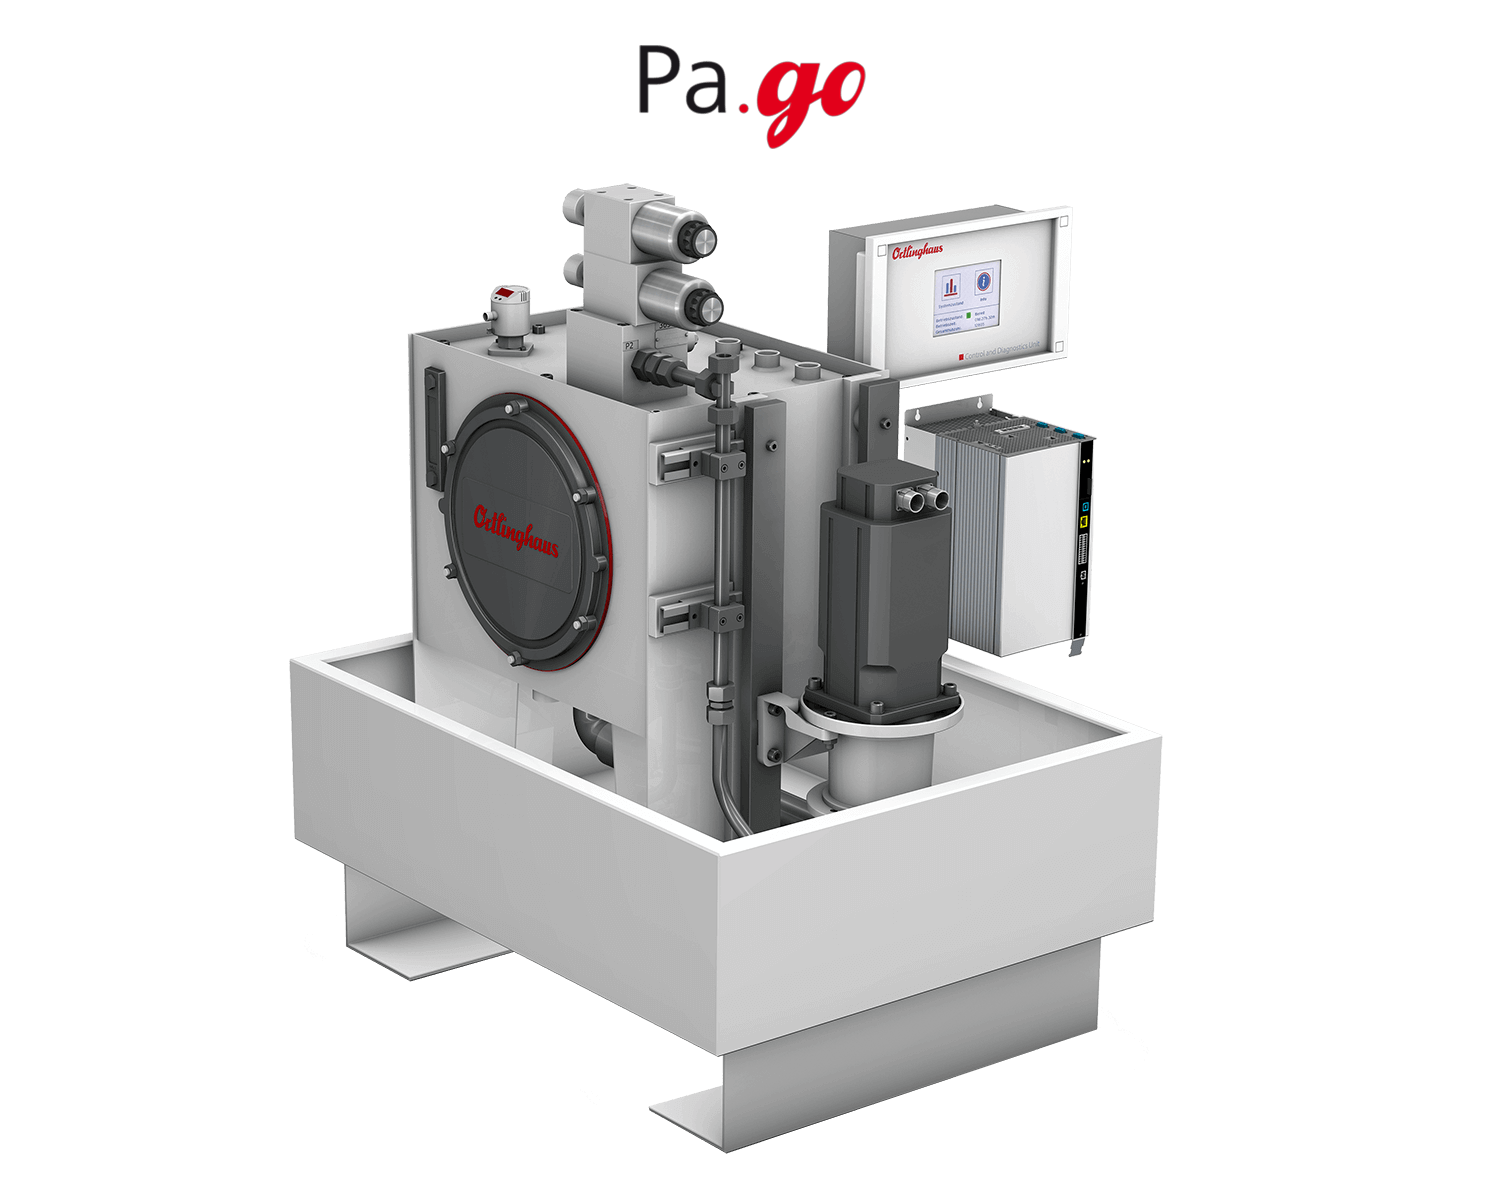 ortlinghaus_mechatronic_system_pago